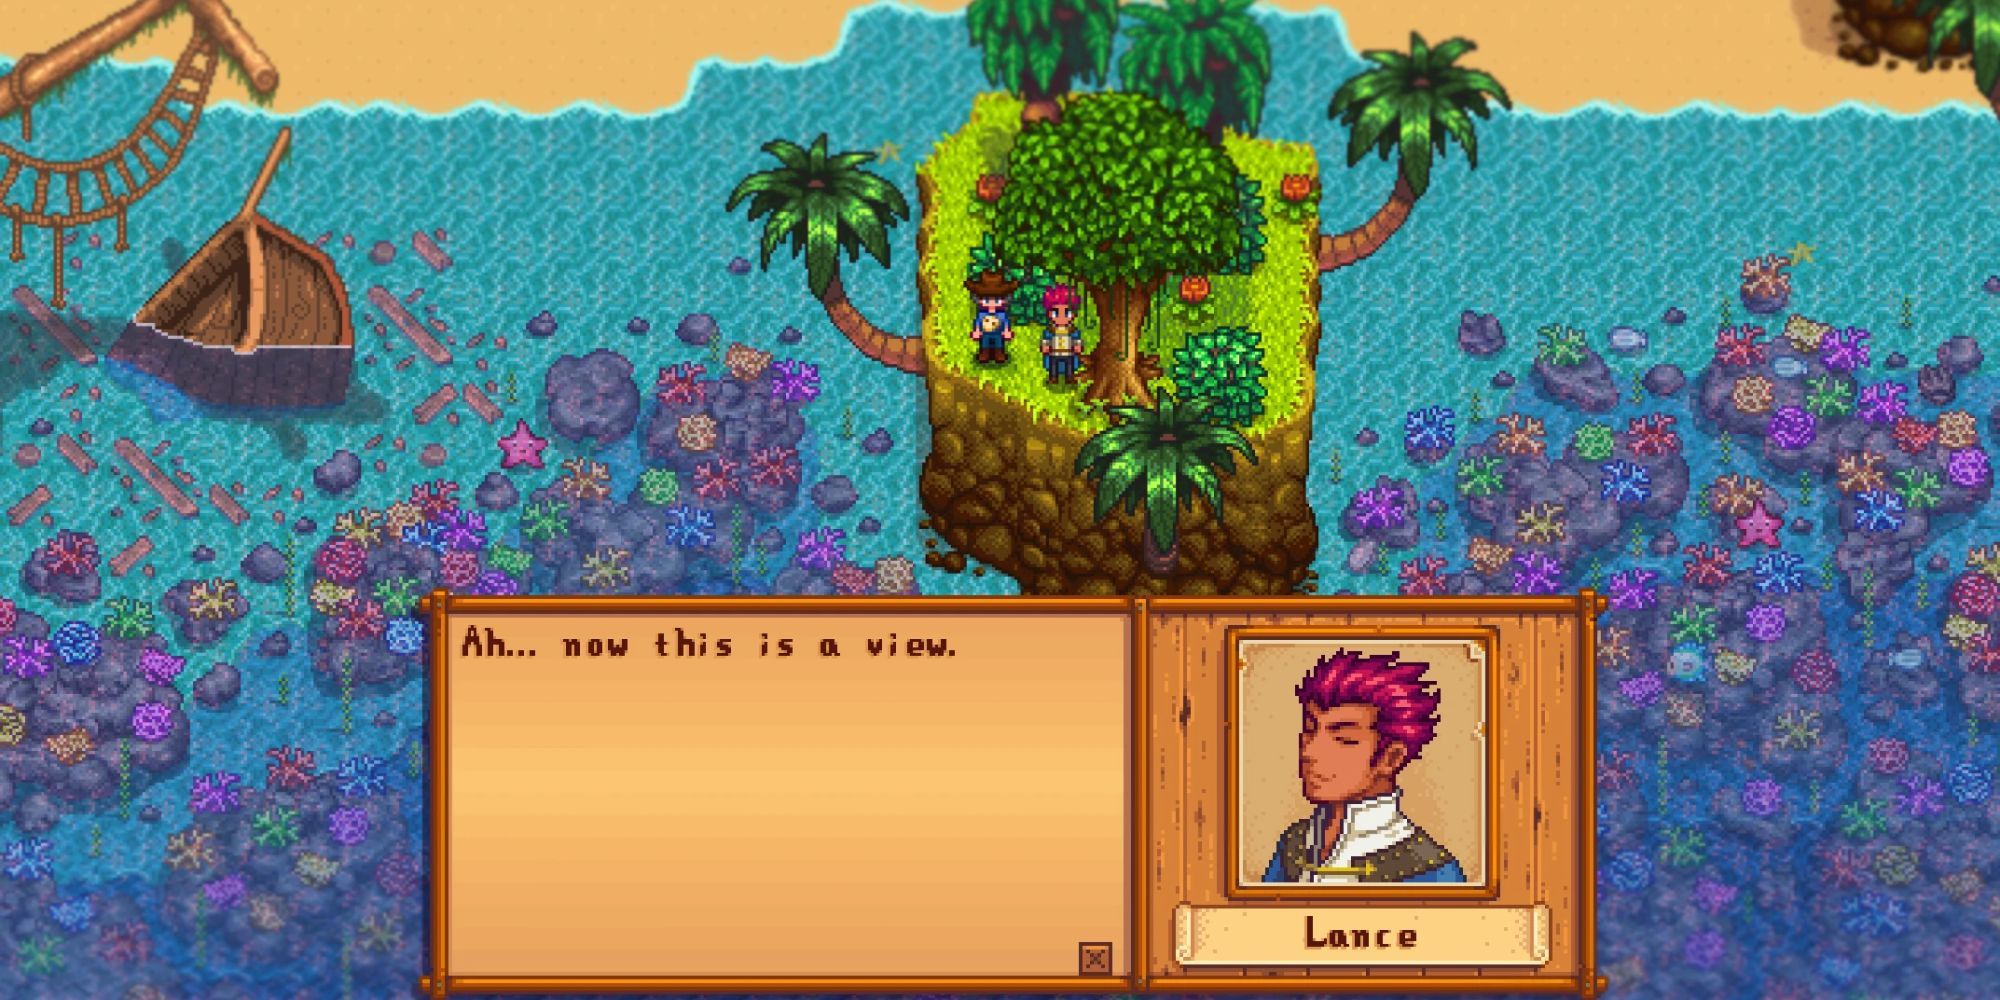 Stardew Valley Expanded's Lance speaking the the villager on an island, he is saying 'ah...now this is a view'